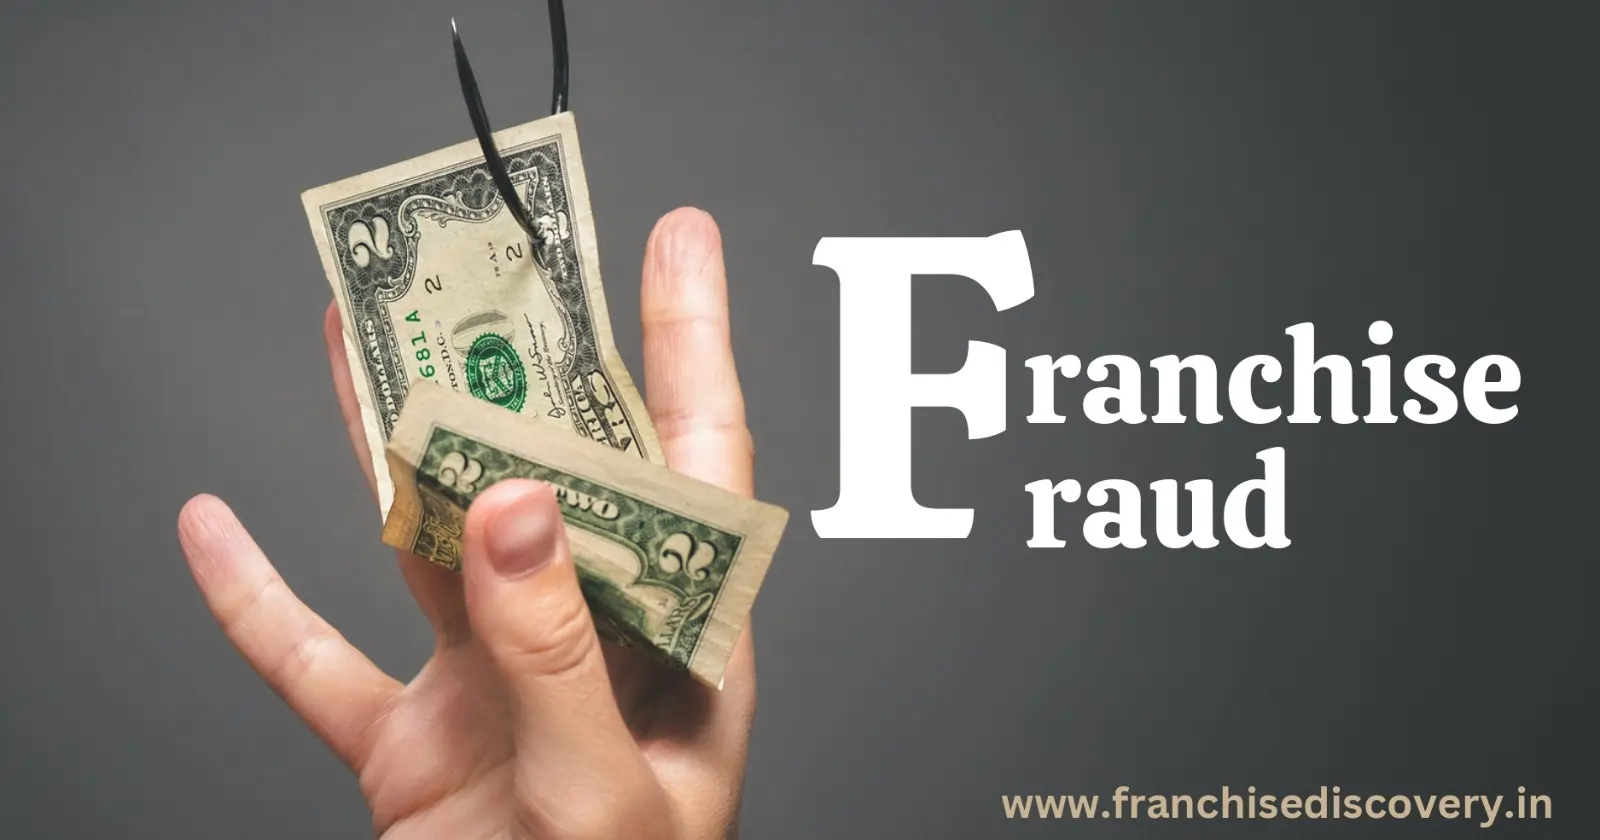 Franchise Frauds: 5 Red flags to watch for when evaluating a franchise opportunity